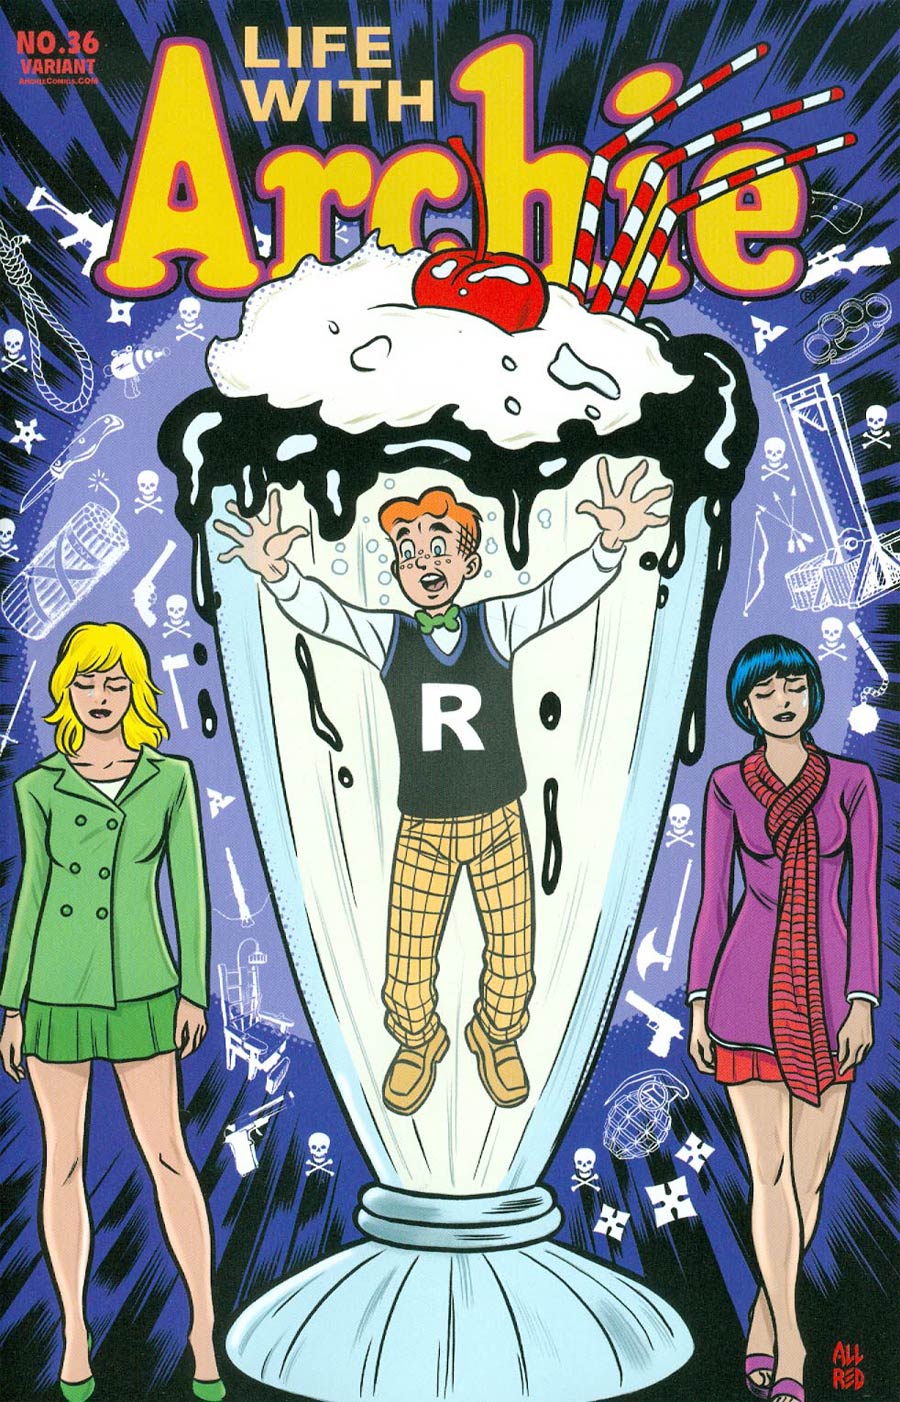 Life With Archie Vol 2 #36 Cover B Comic Format Mike Allred Cover